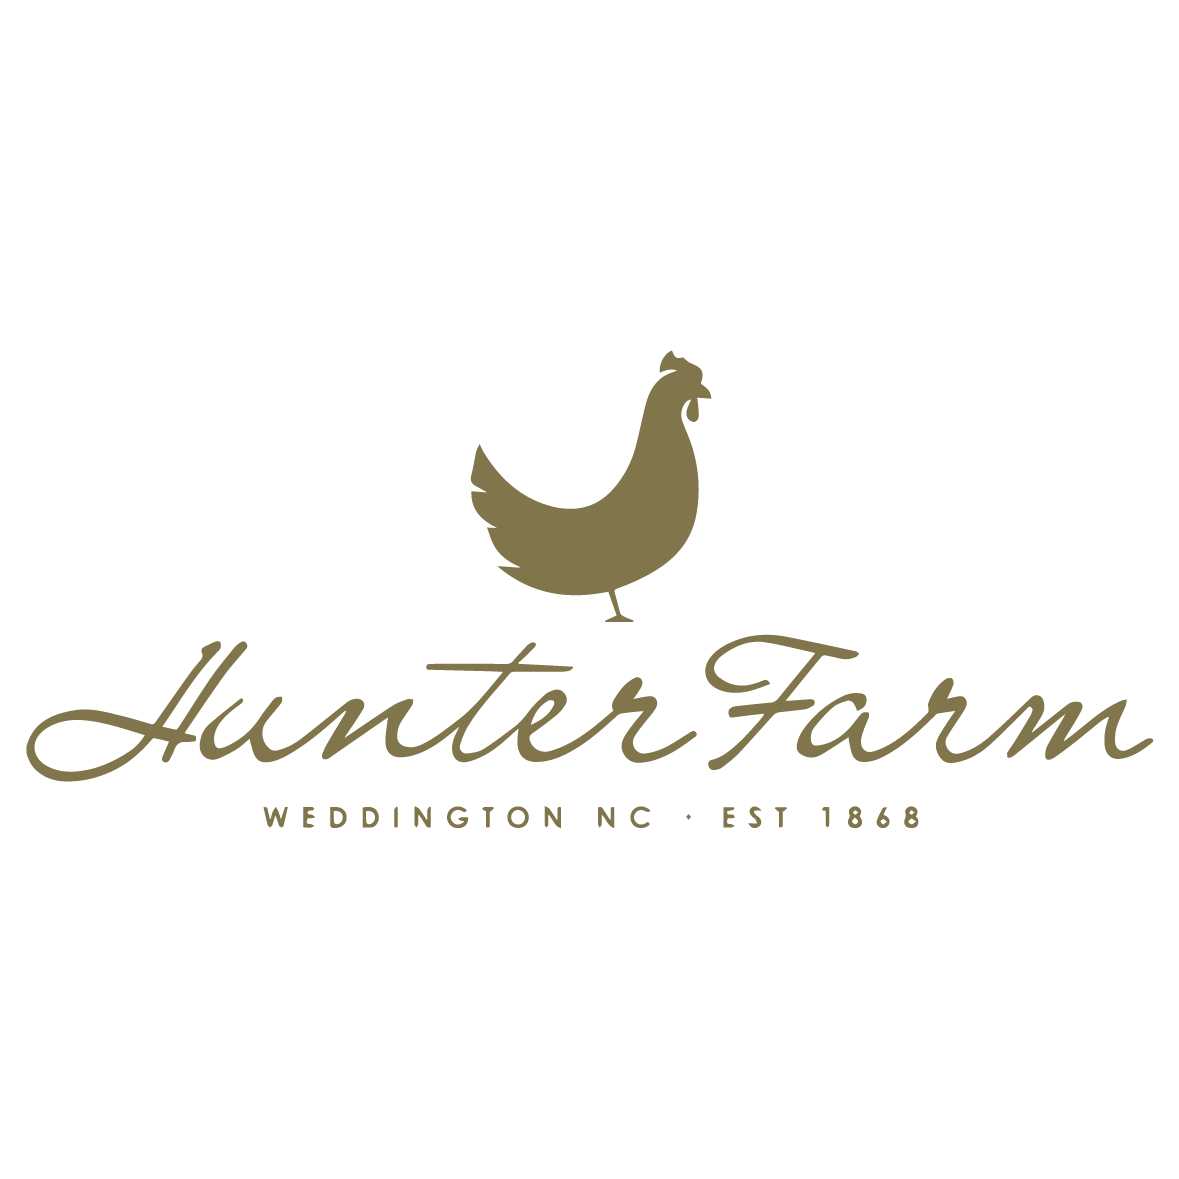 The Wandering Social Trusted By Hunter Farm